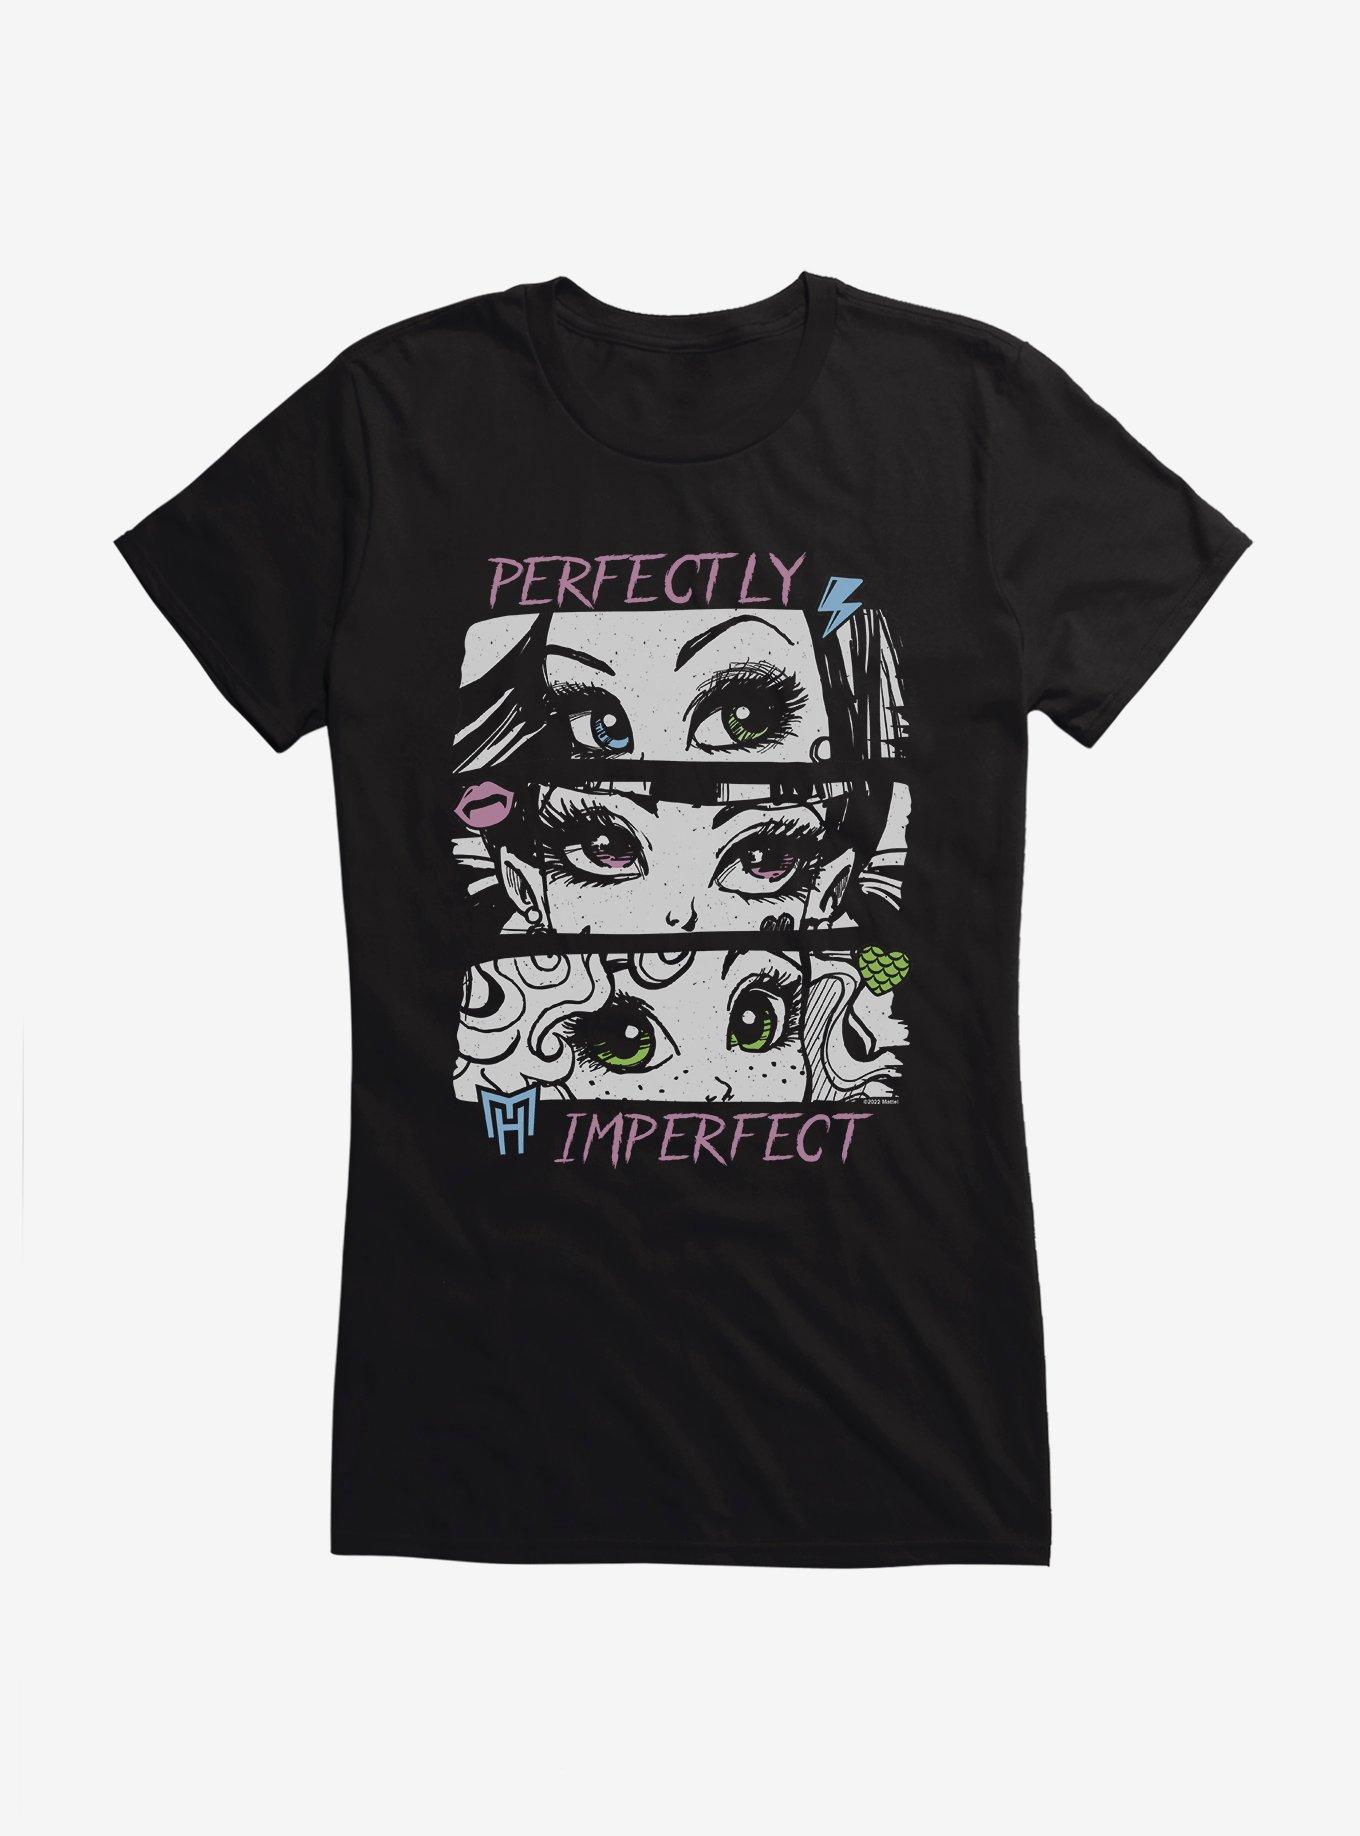 Monster High Perfectly Imperfect Girls T-Shirt